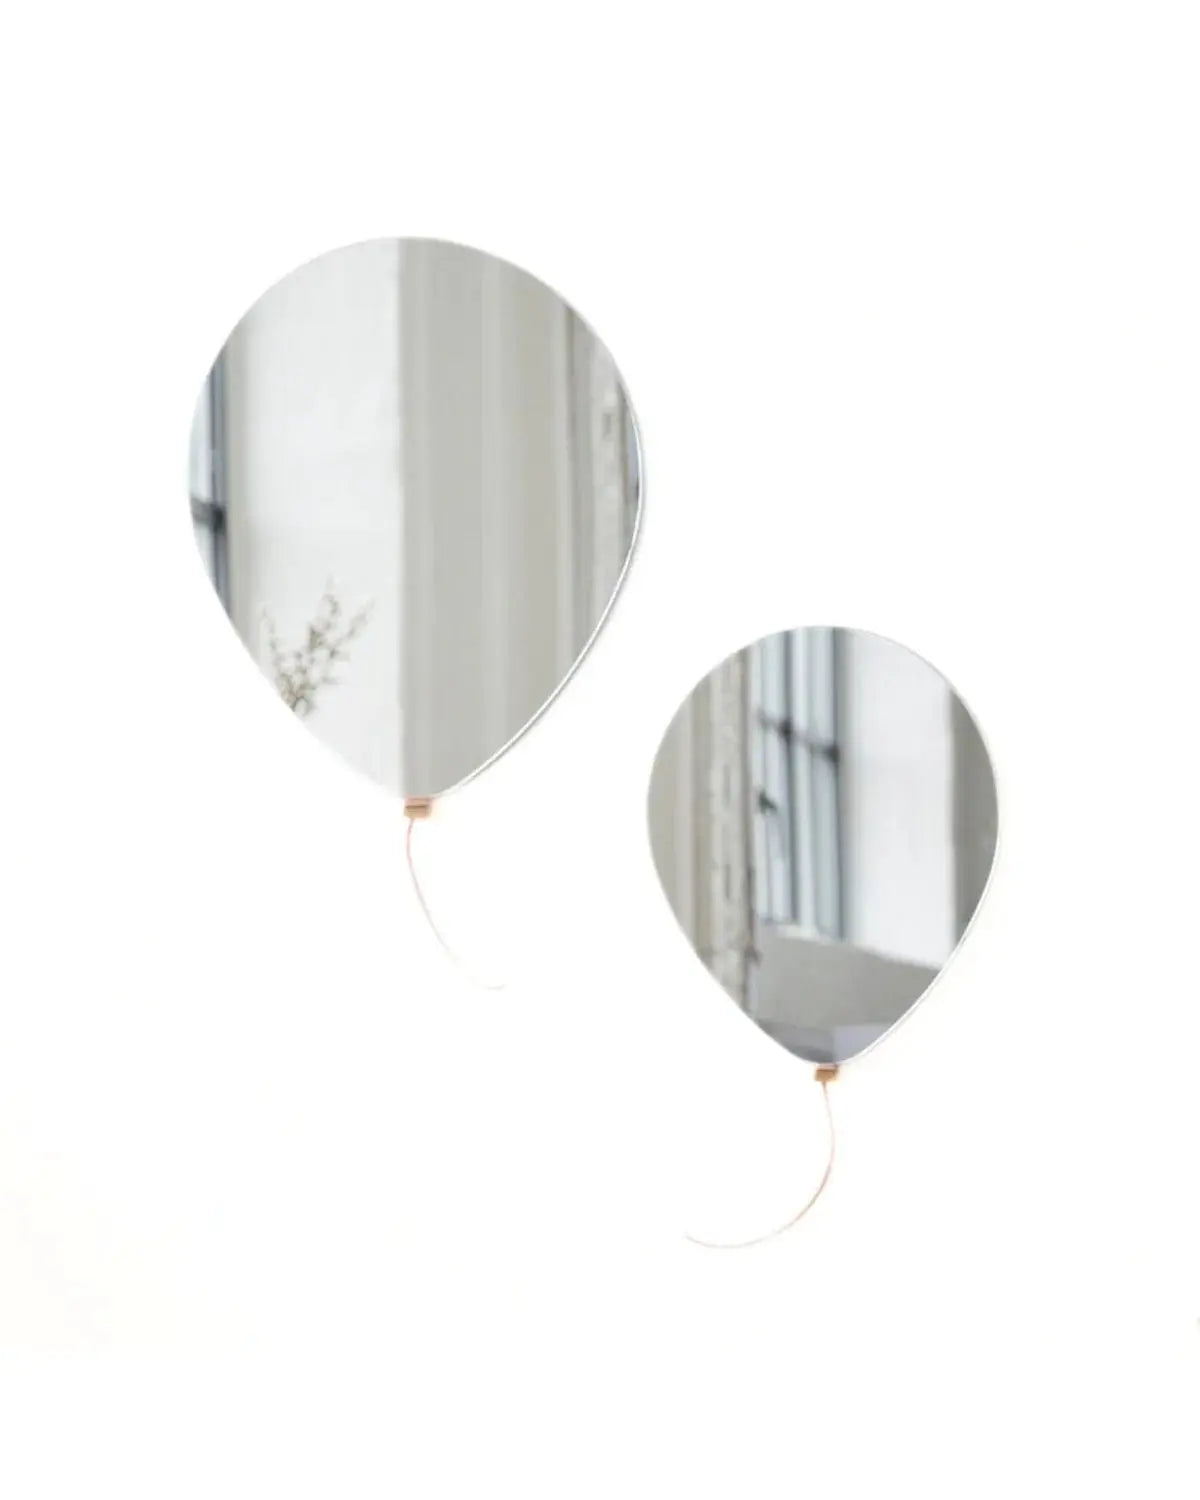 Decorative Mirror Balloons, Set of 2, Leather Strap, Unique Home Accents  EO Play   